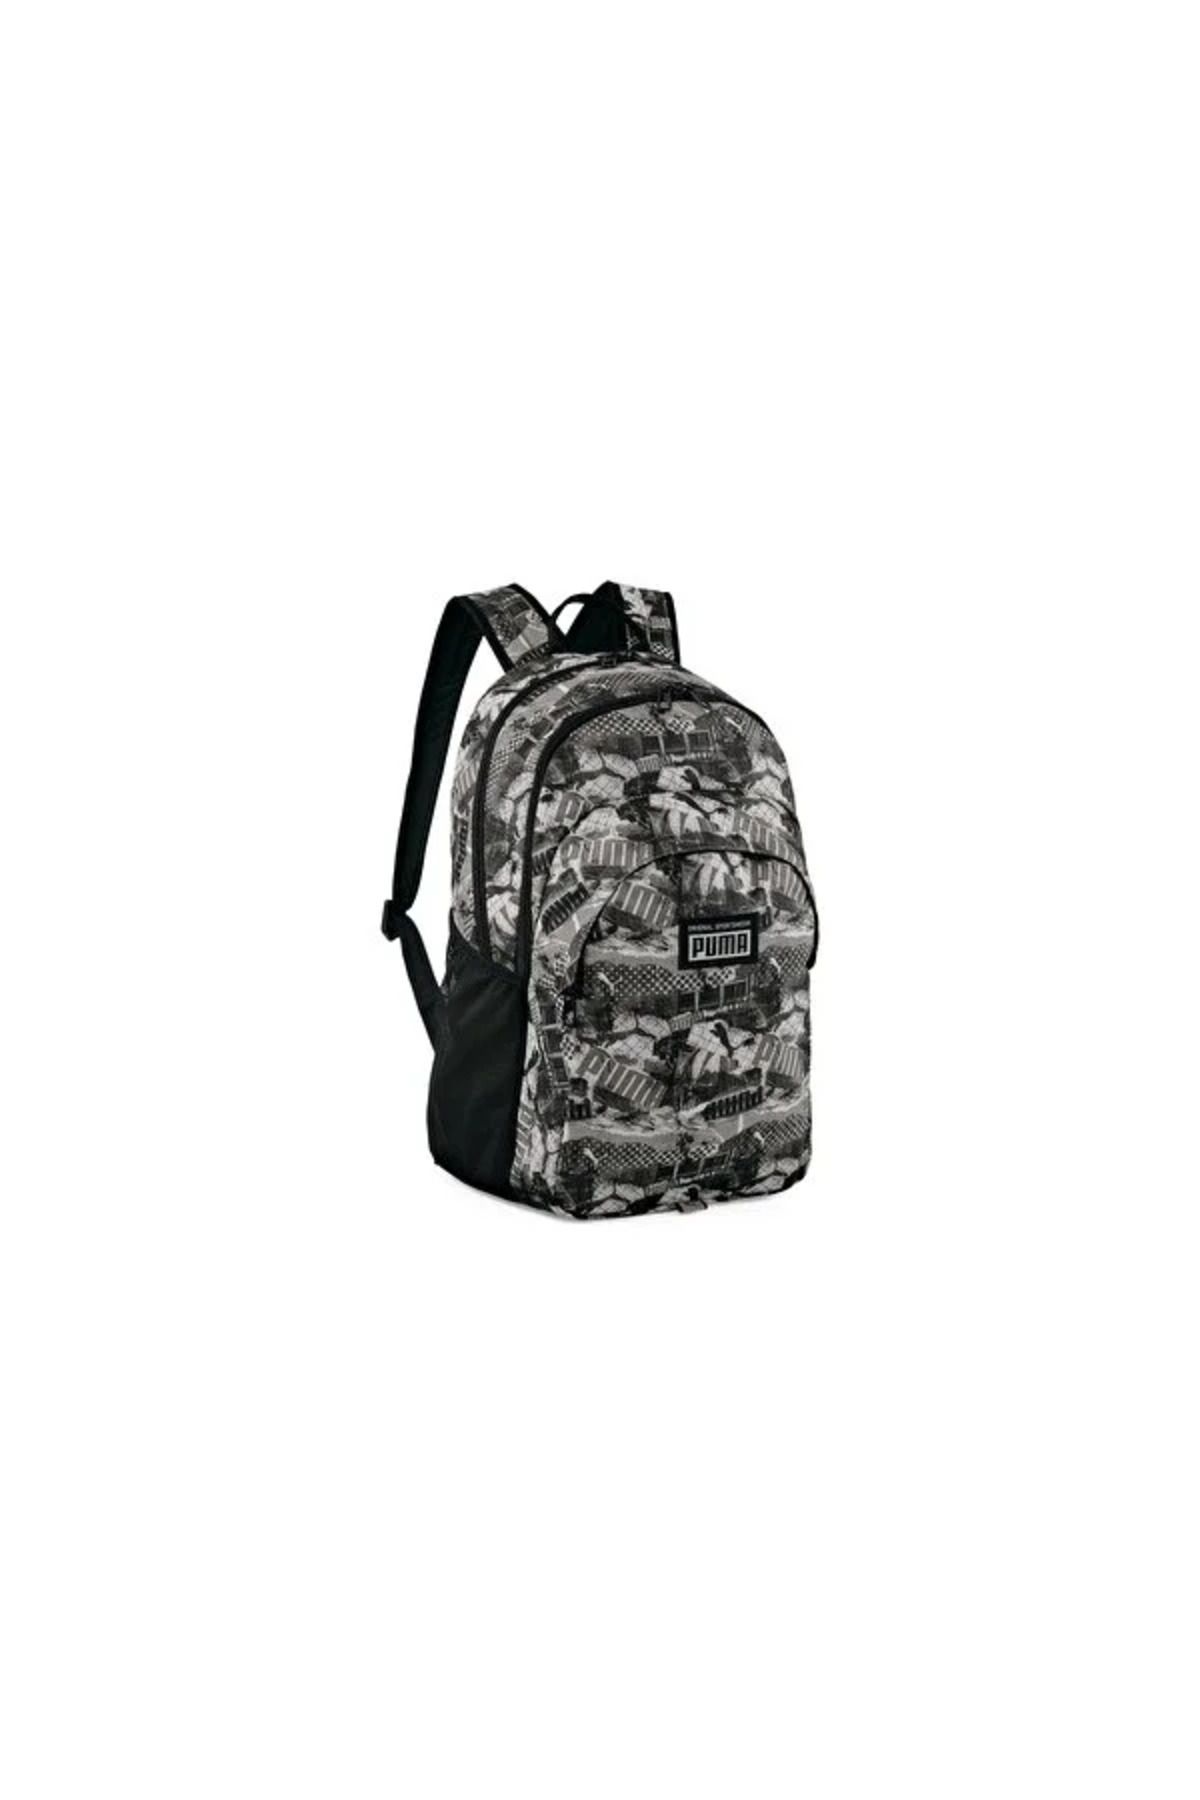 Puma 79133 gray Backpack For Unisex